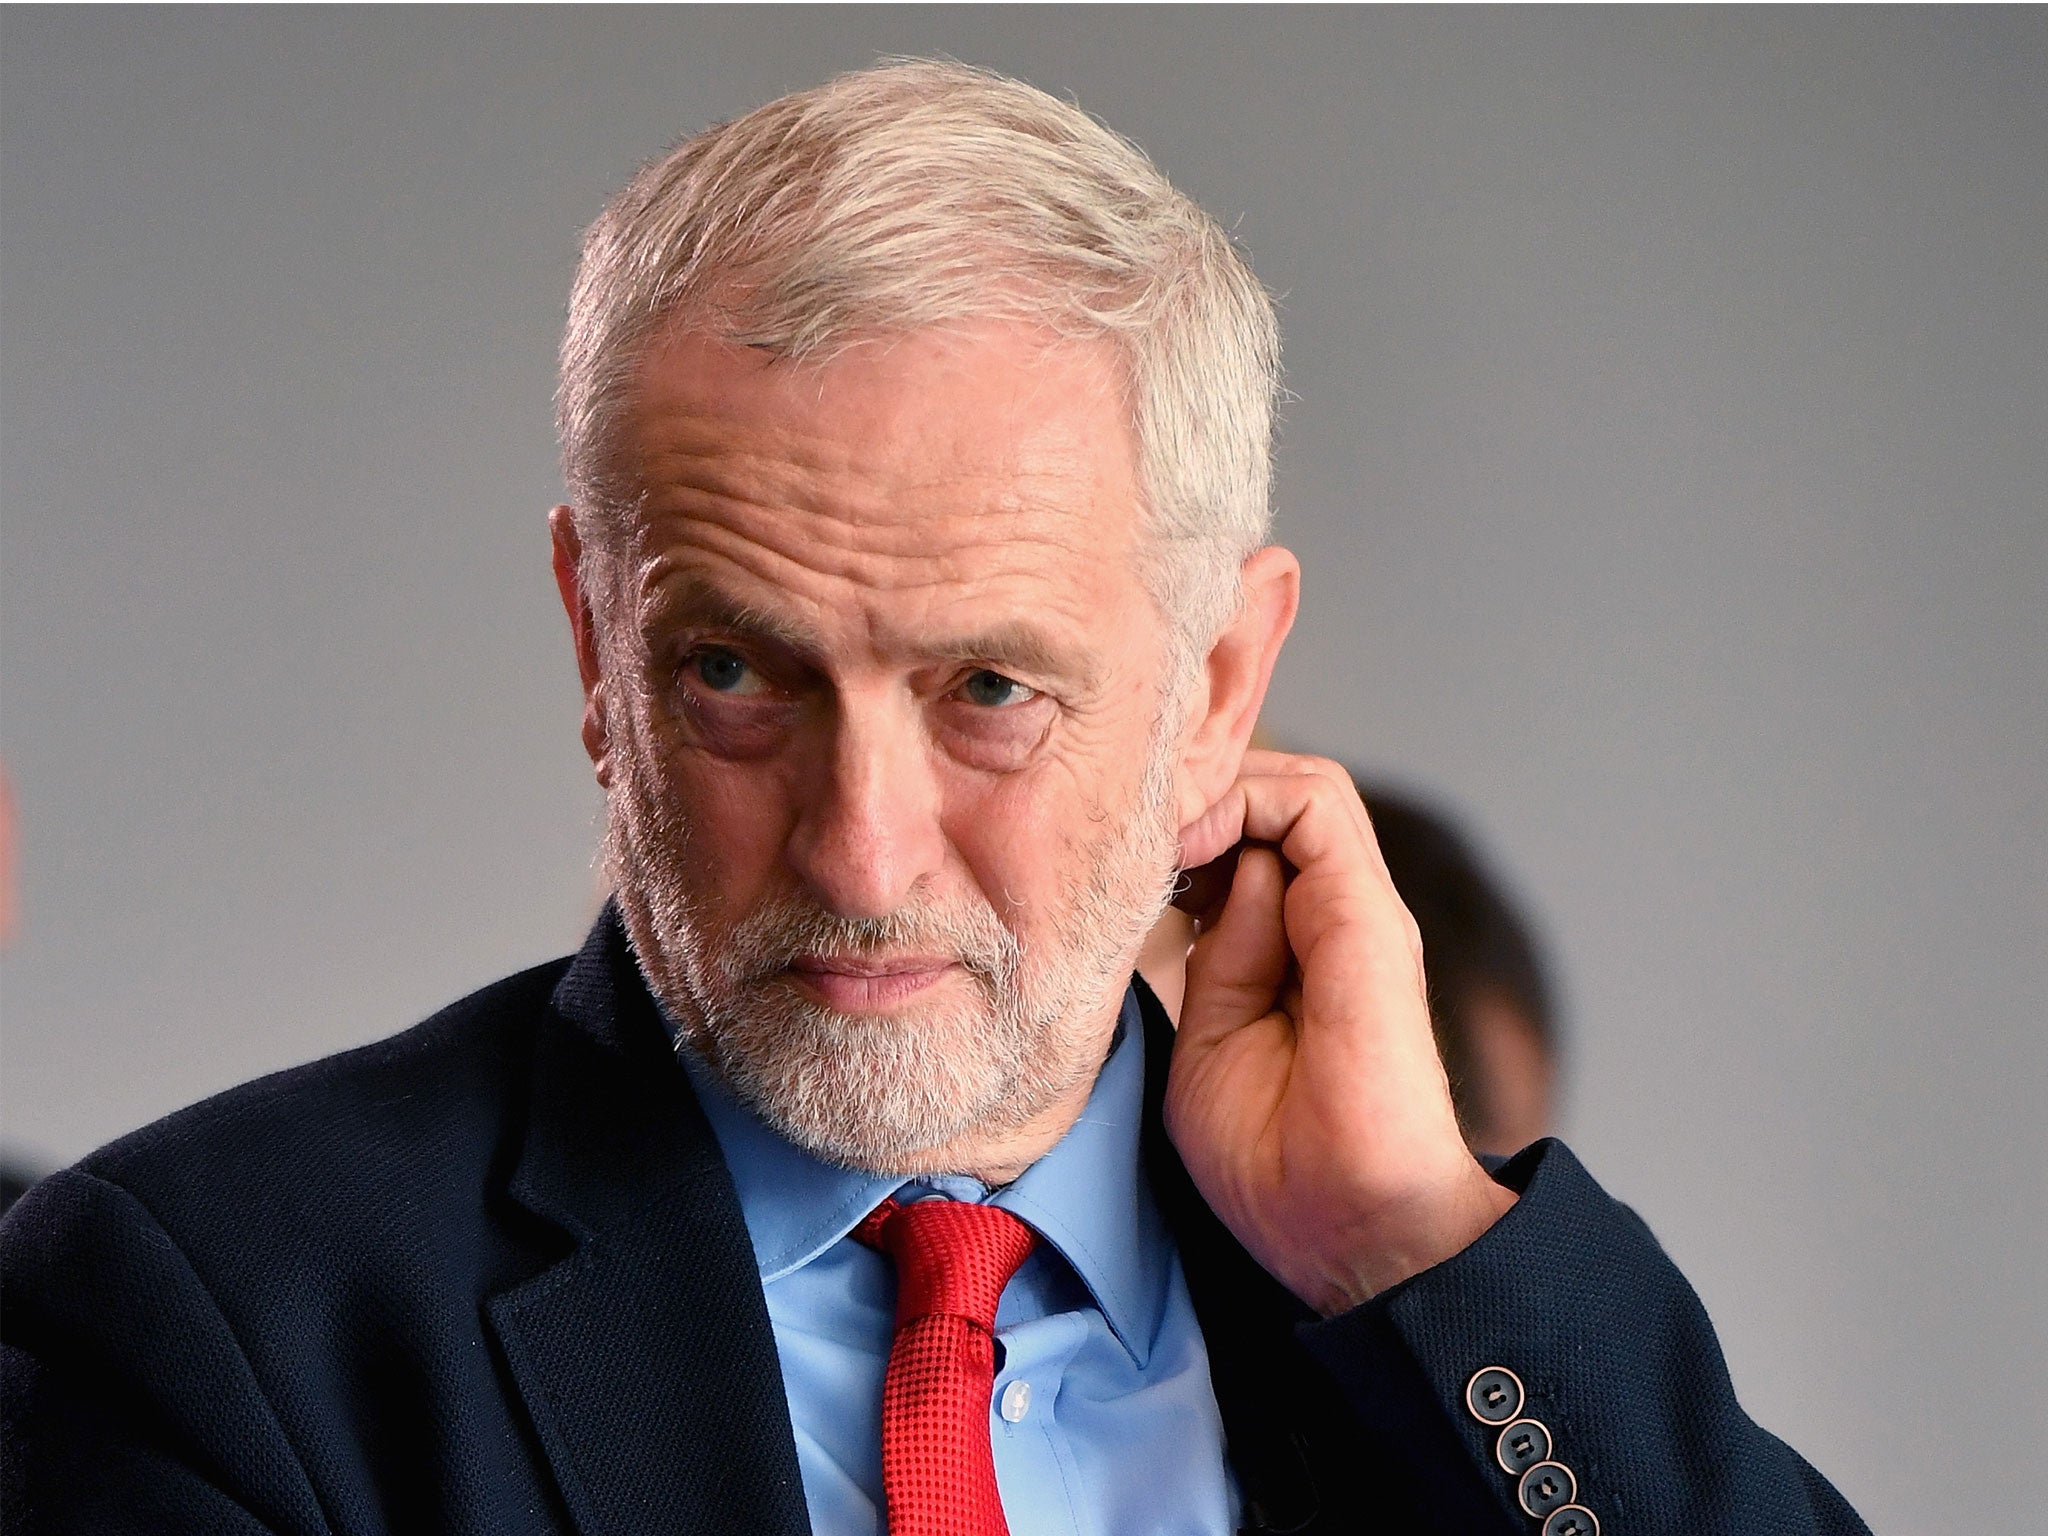 Mr Corbyn has reportedly been warned to avoid criticising the former prime minister ahead of the Chilcot Inquiry